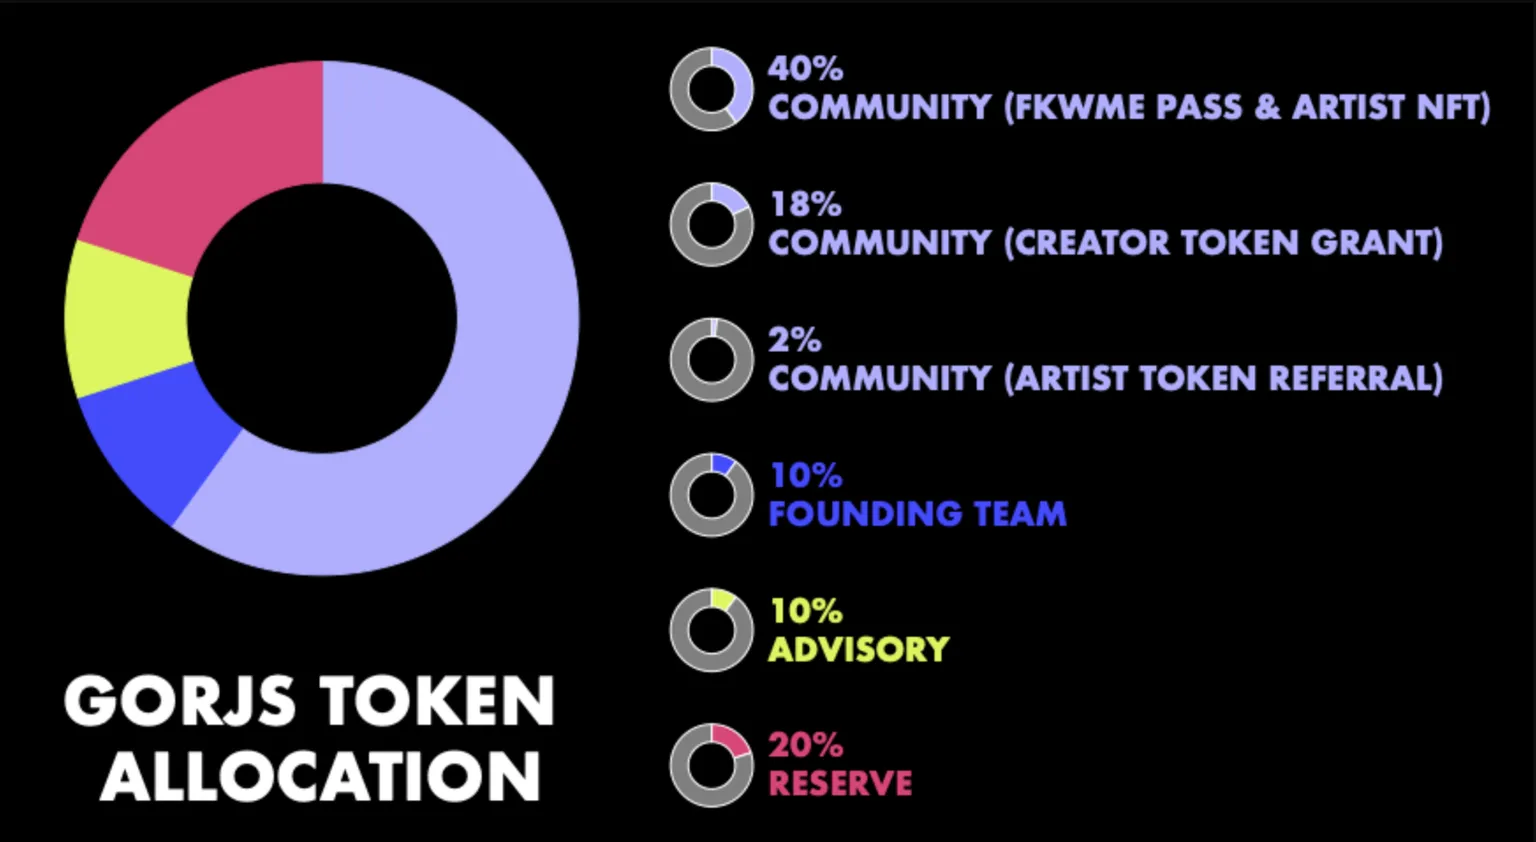 Image of a circular chart showing the GORGJS DAO's token allocation. 40% of tokens going to "community" from NFT mint and artist NFTs, 18% going to "community" through creator token grant, 2% going to "community" through artist token referral, 10% going to founding team, 10% going to advisory team, and 20% going to "reserve."